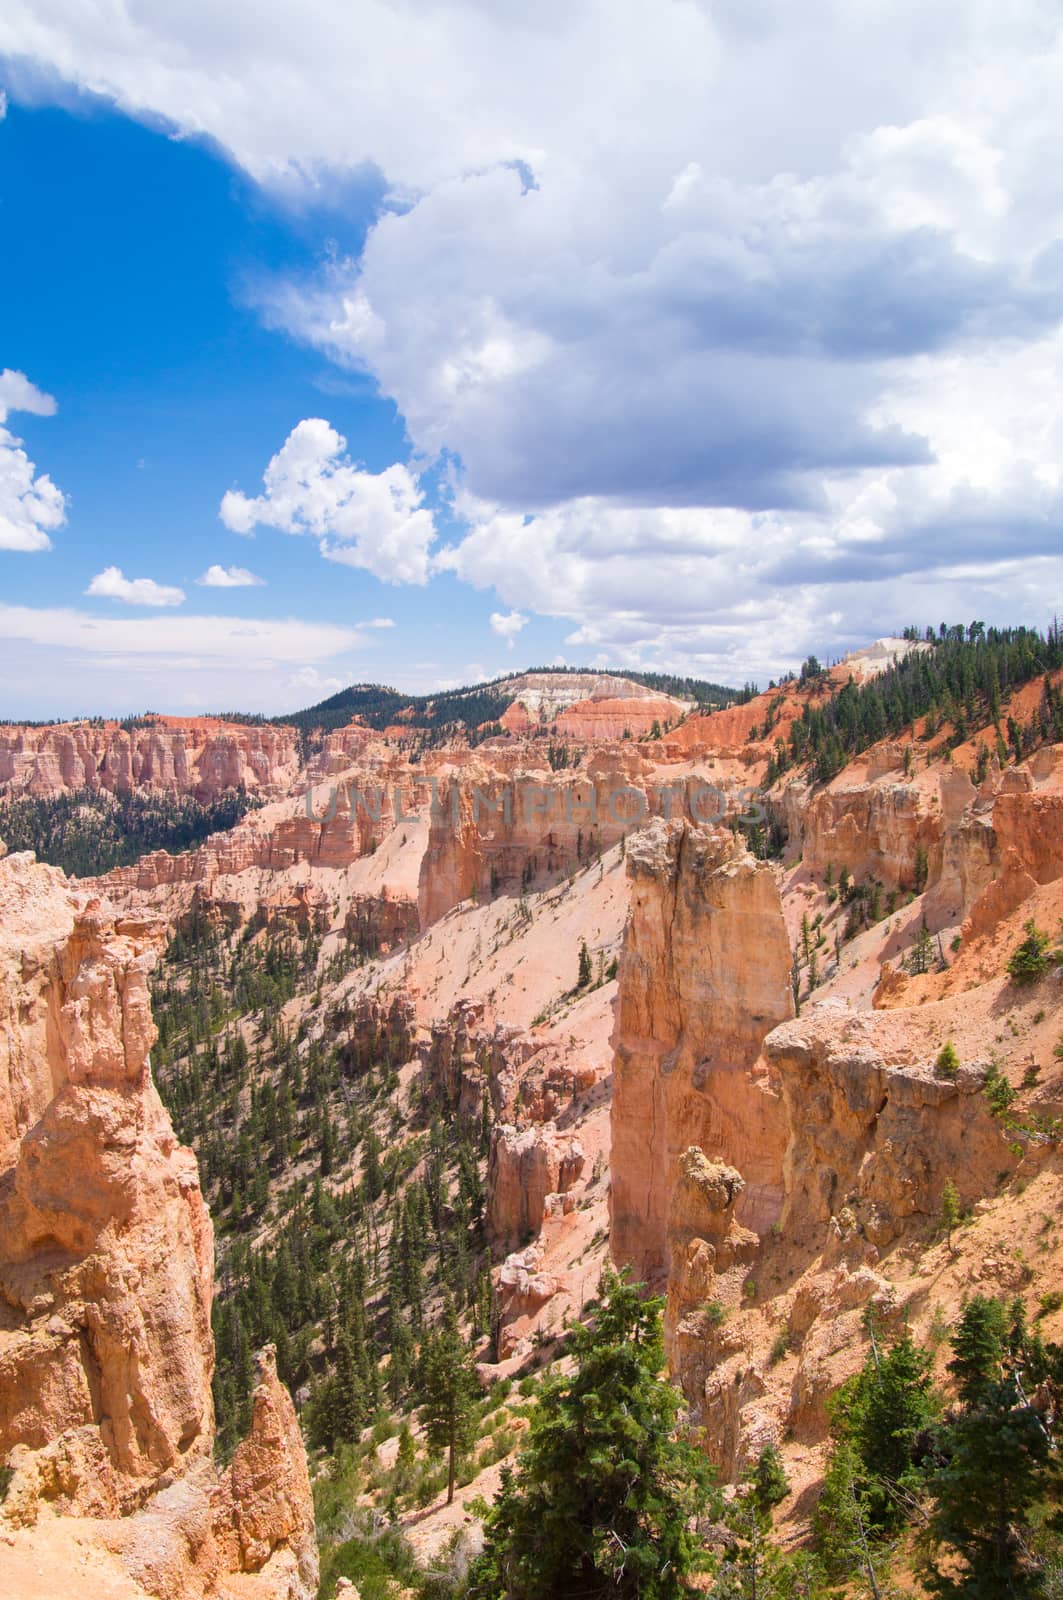 Sandstone Canyons at Bryce National Park by emattil